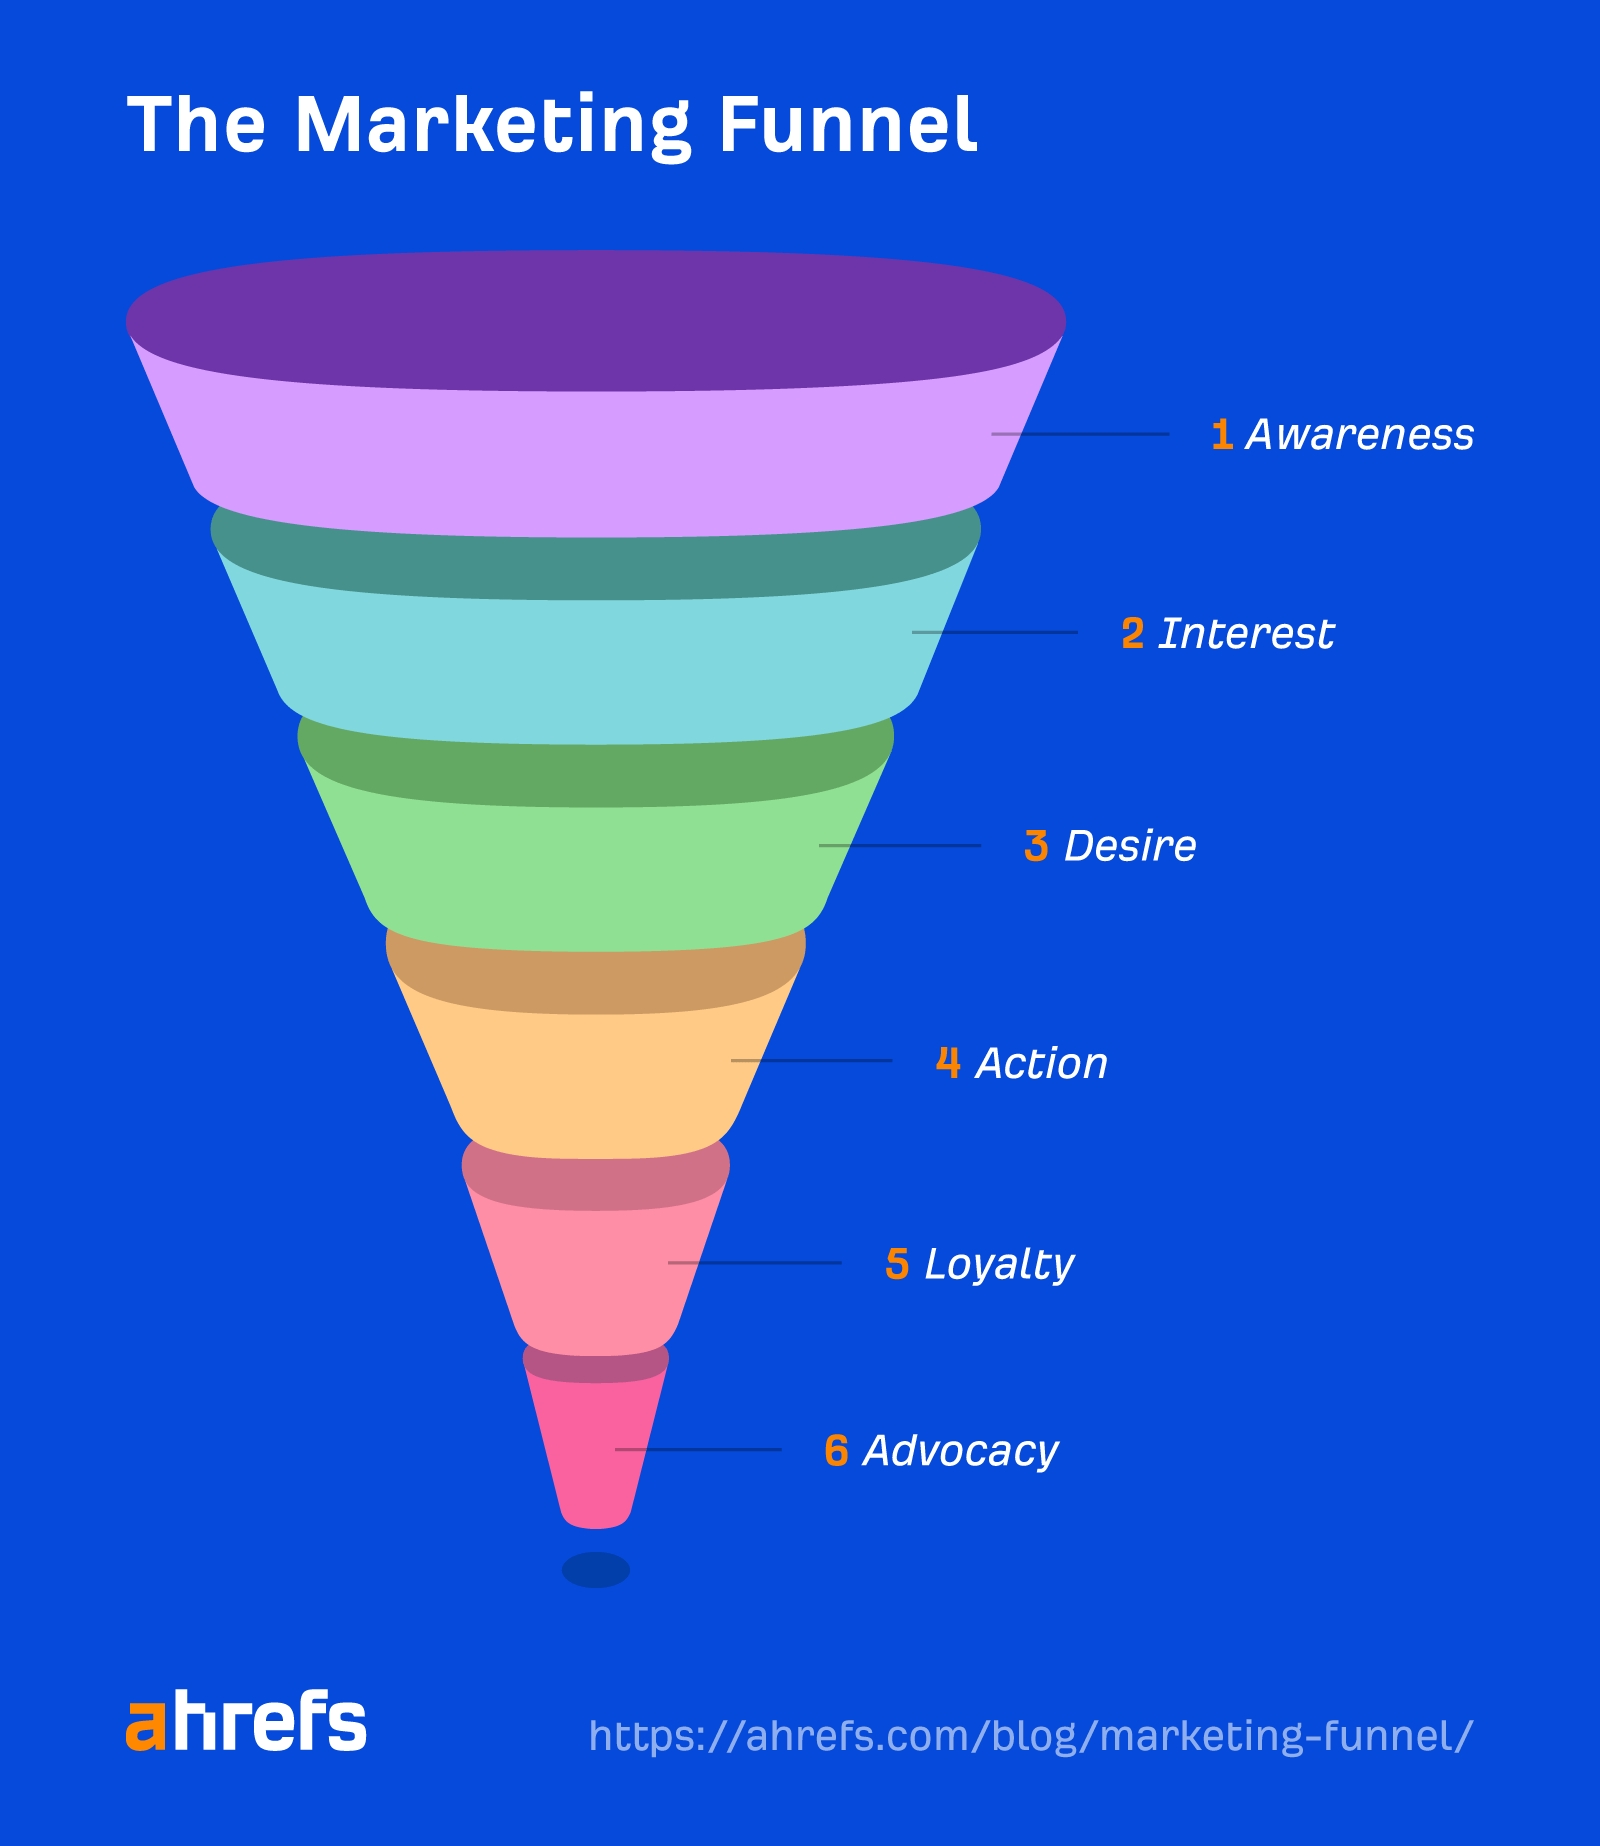 The marketing funnel with Loyalty and Advocacy stages added
